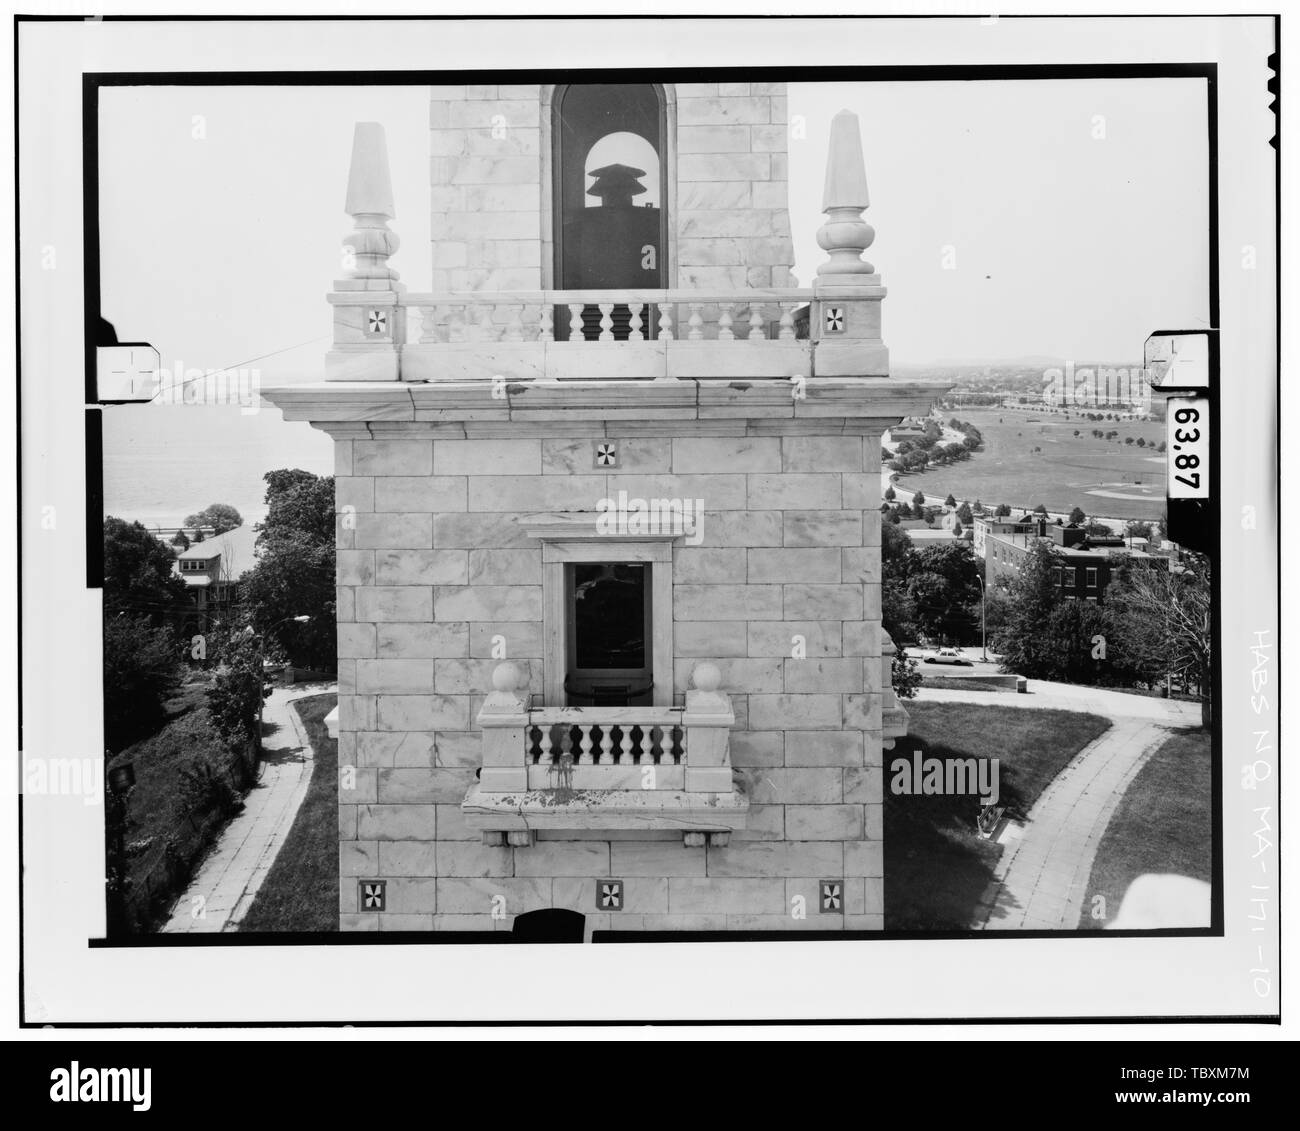 NORTH ELEVATION, LEVEL 4 Copy photograph of photogrammetric plate LCHABSGS11D1981N5R.  Dorchester Heights Monument, Thomas Park, Boston, Suffolk County, MA Peabody and Stearns Washington, George Burns, John A, field team Lawrence, Jeanne C, field team Alderson, Caroline R, field team Cronenberger, Richard J, project manager Graham, William J, field team Marsh, David T, field team Lowe, Jet, photographer Dennett, Muessig and Associates, Limited, photographer Taylor, Douglas R, delineator Schiller, Angela J, delineator Trumbull, Rebecca, delineator Stock Photo